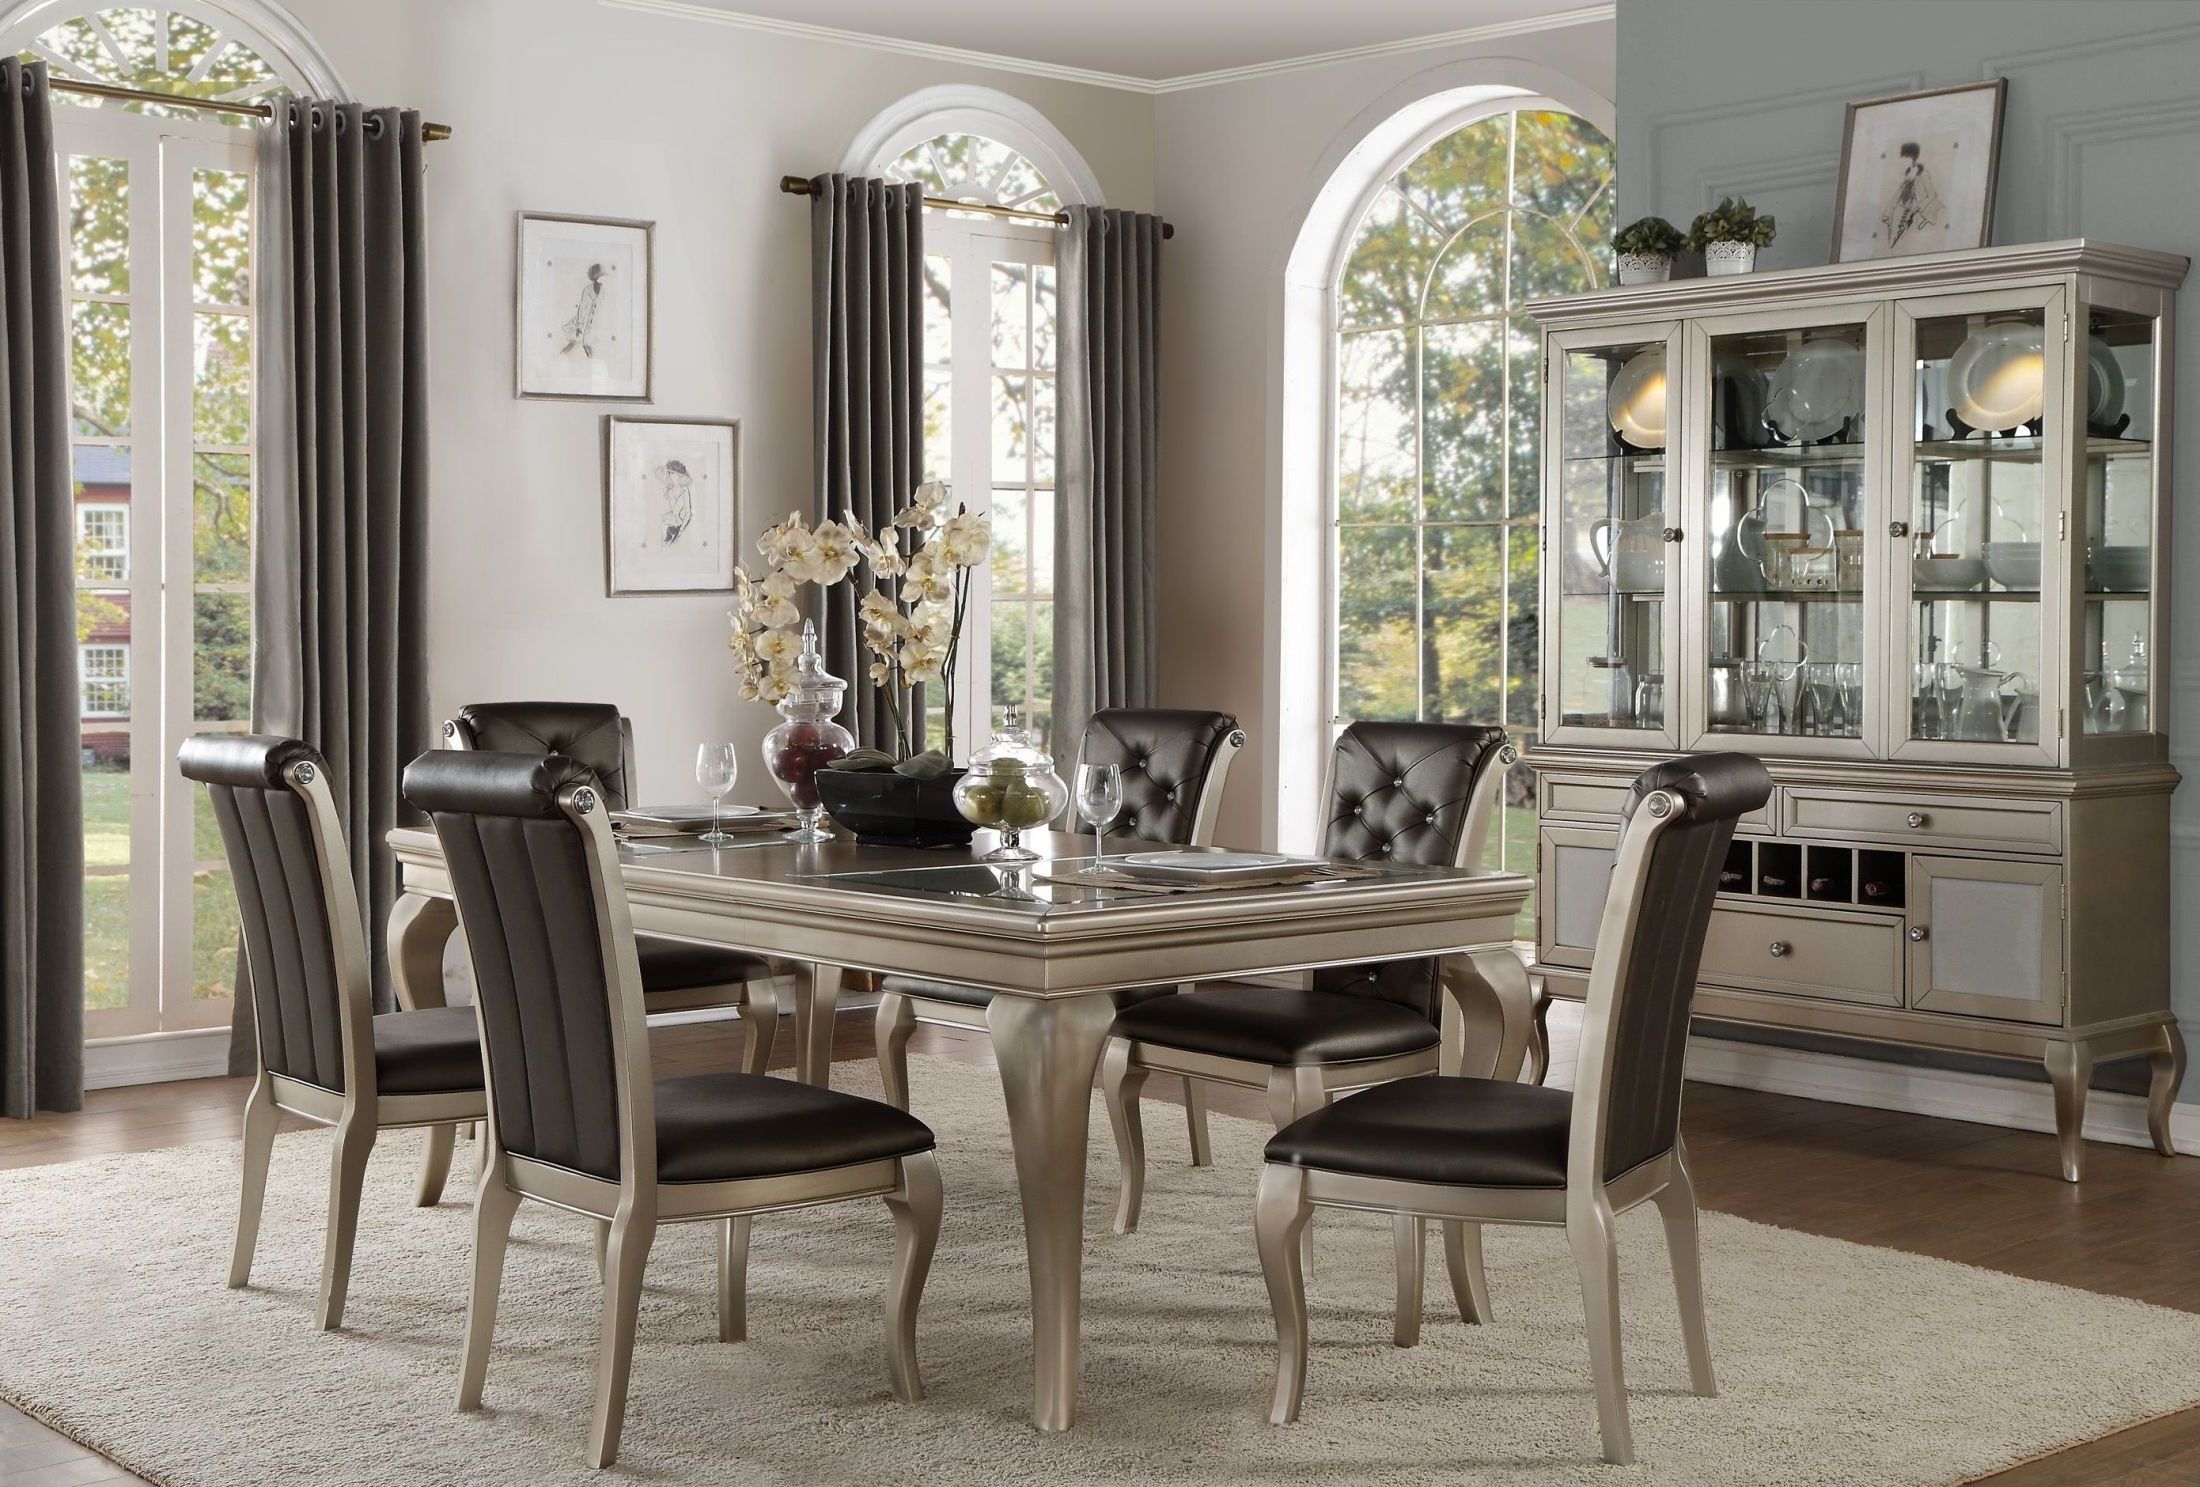 Homelegance Crawford Silver Extendable Dining Room Set – Crawford With Most Up To Date Crawford 6 Piece Rectangle Dining Sets (View 15 of 25)